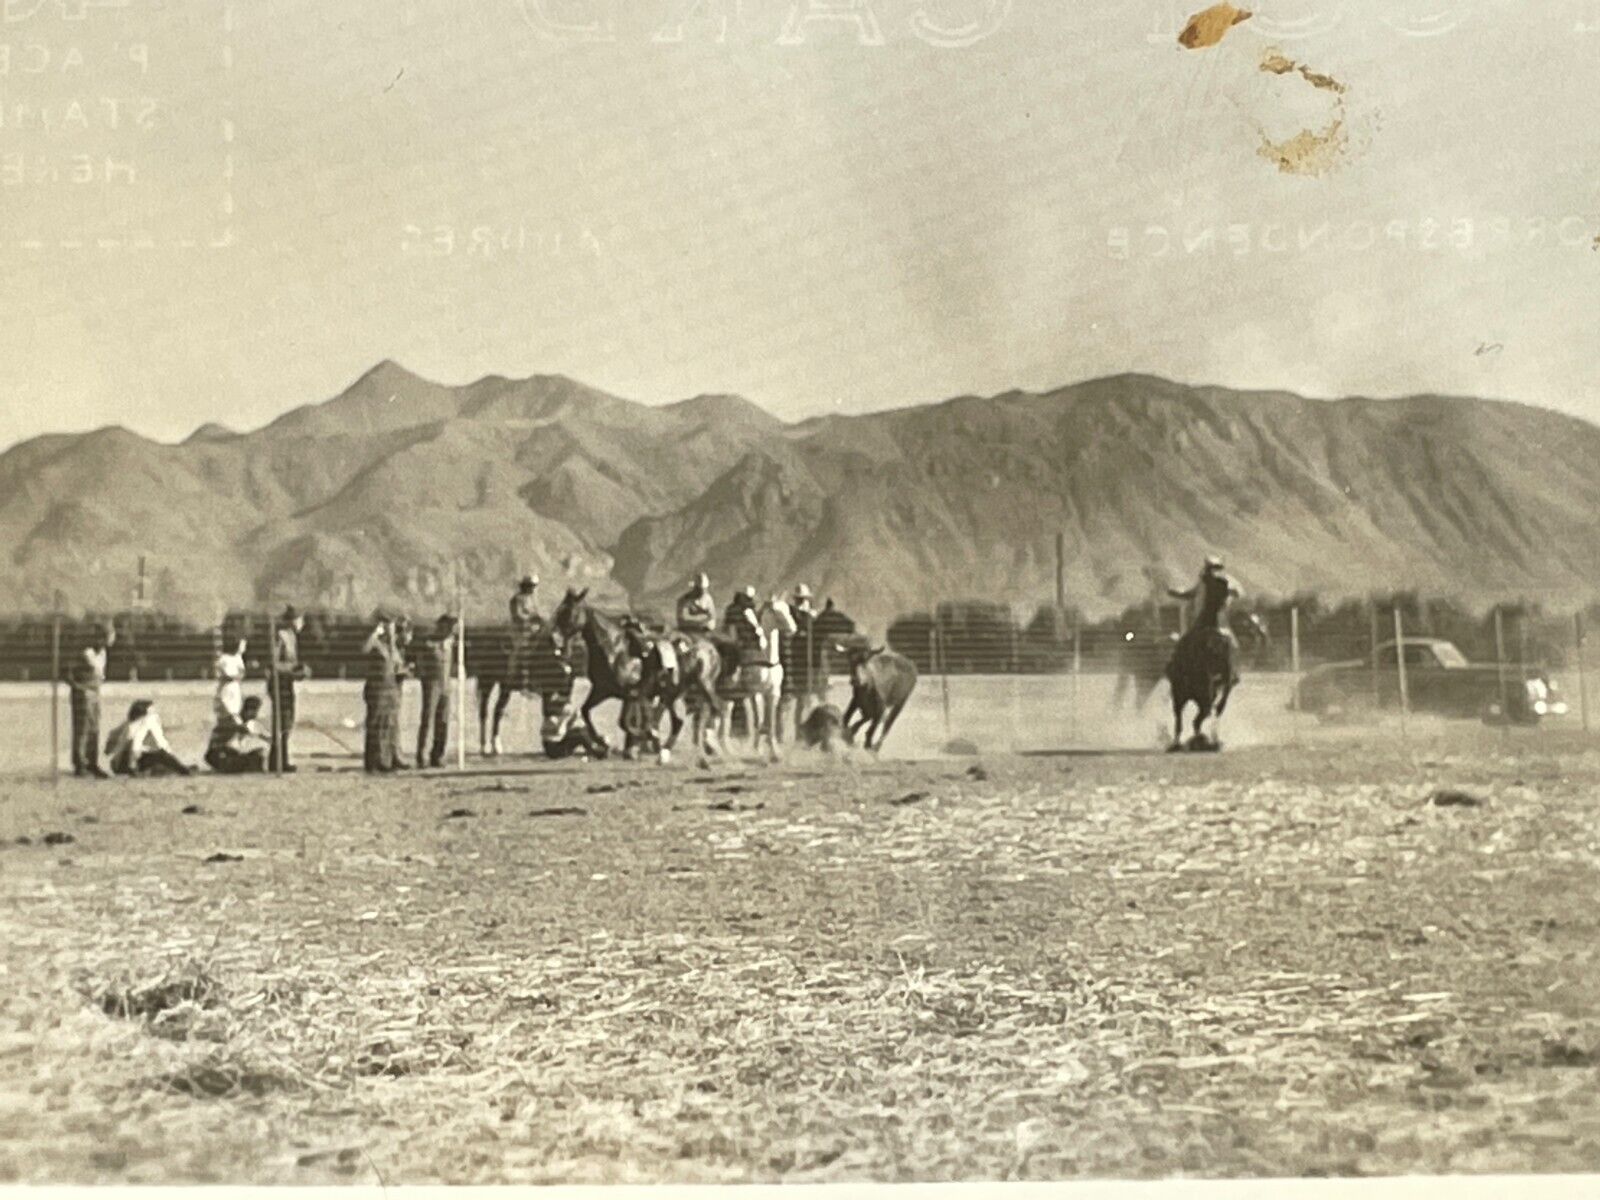 T8 RPPC Photo Postcard Cowboy Action Shot Roping Cattle 1910-30's